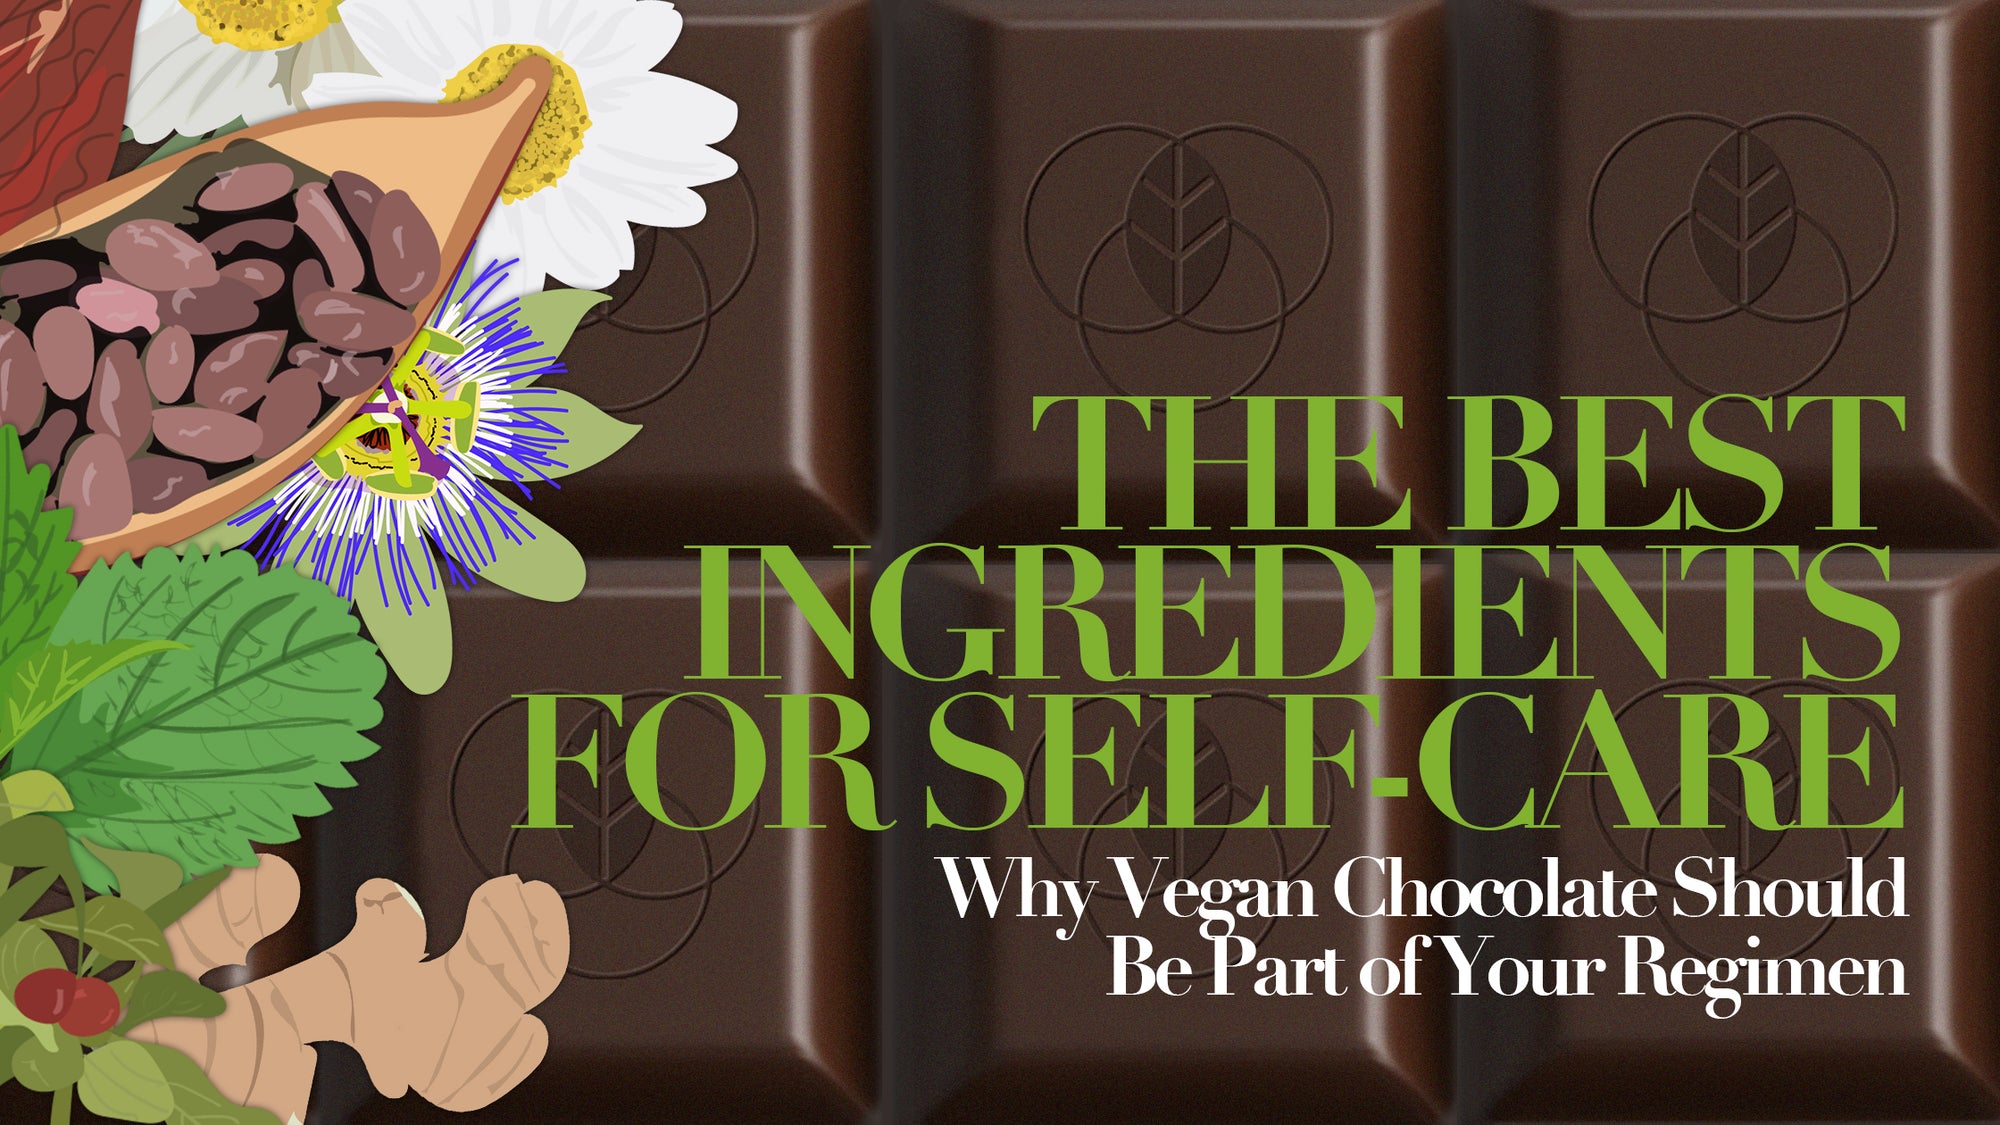 The Best Ingredients For Self-Care: Why Vegan Chocolate Should Be Part of Your Regimen